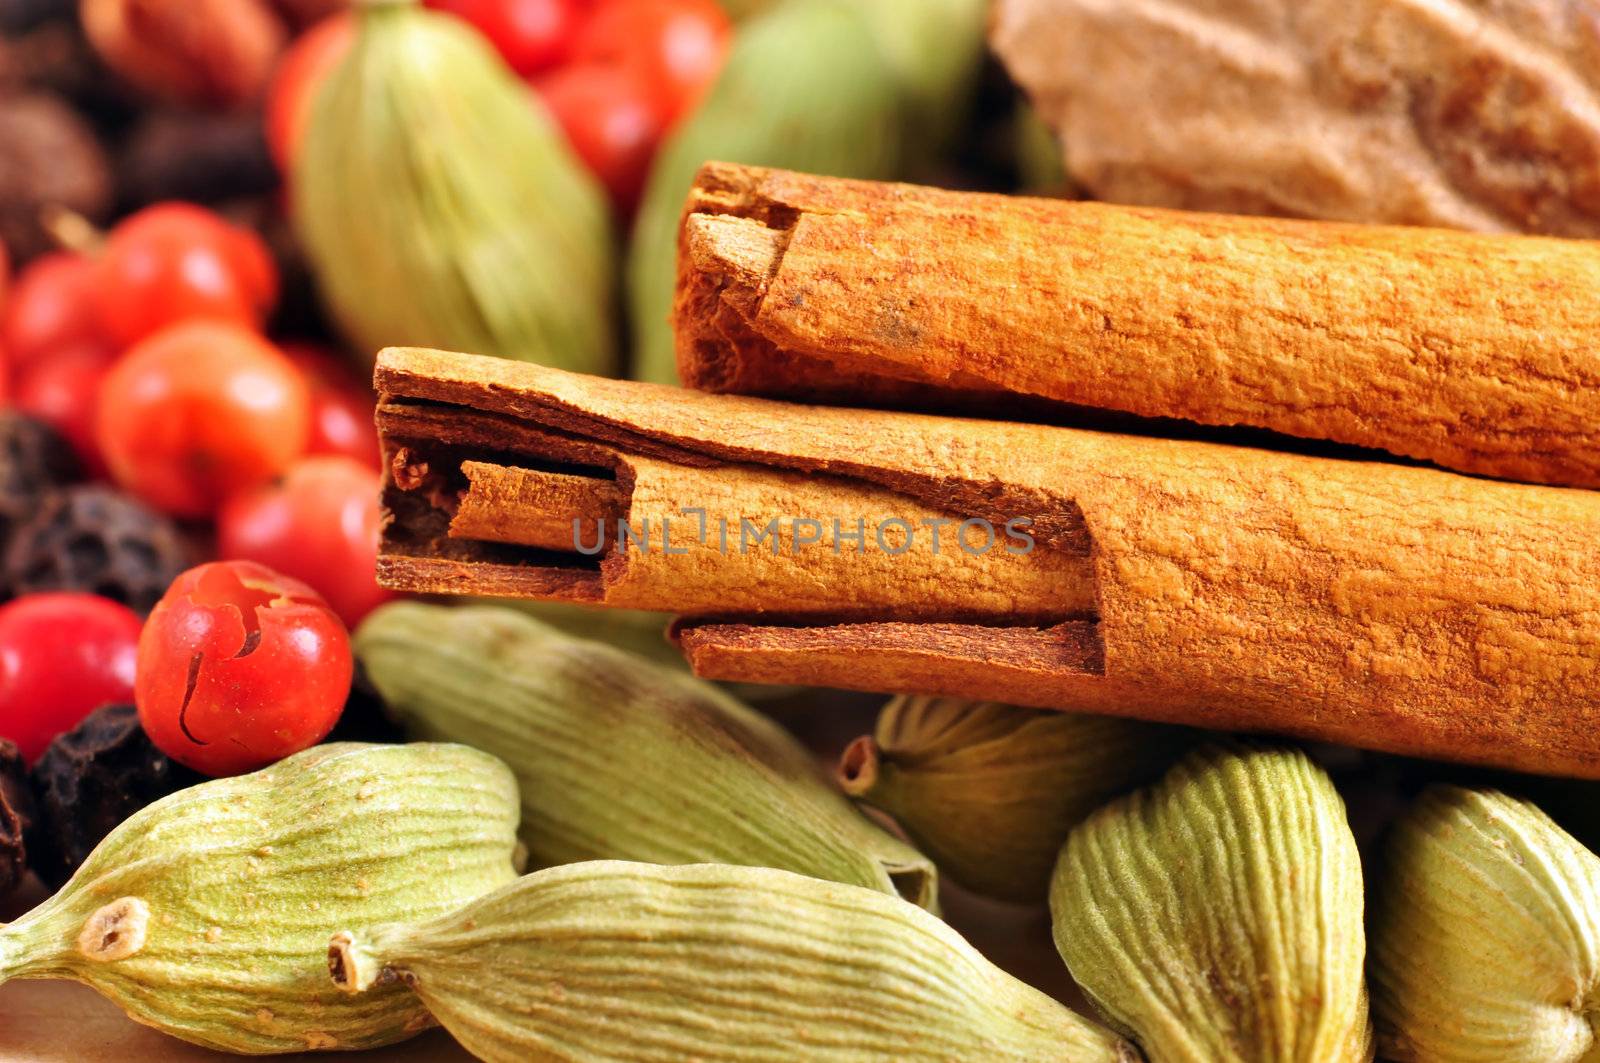 Food background: variety of whole spices for a recipe, cinnamon sticks, cardamons, pink peppers and nutmeg.